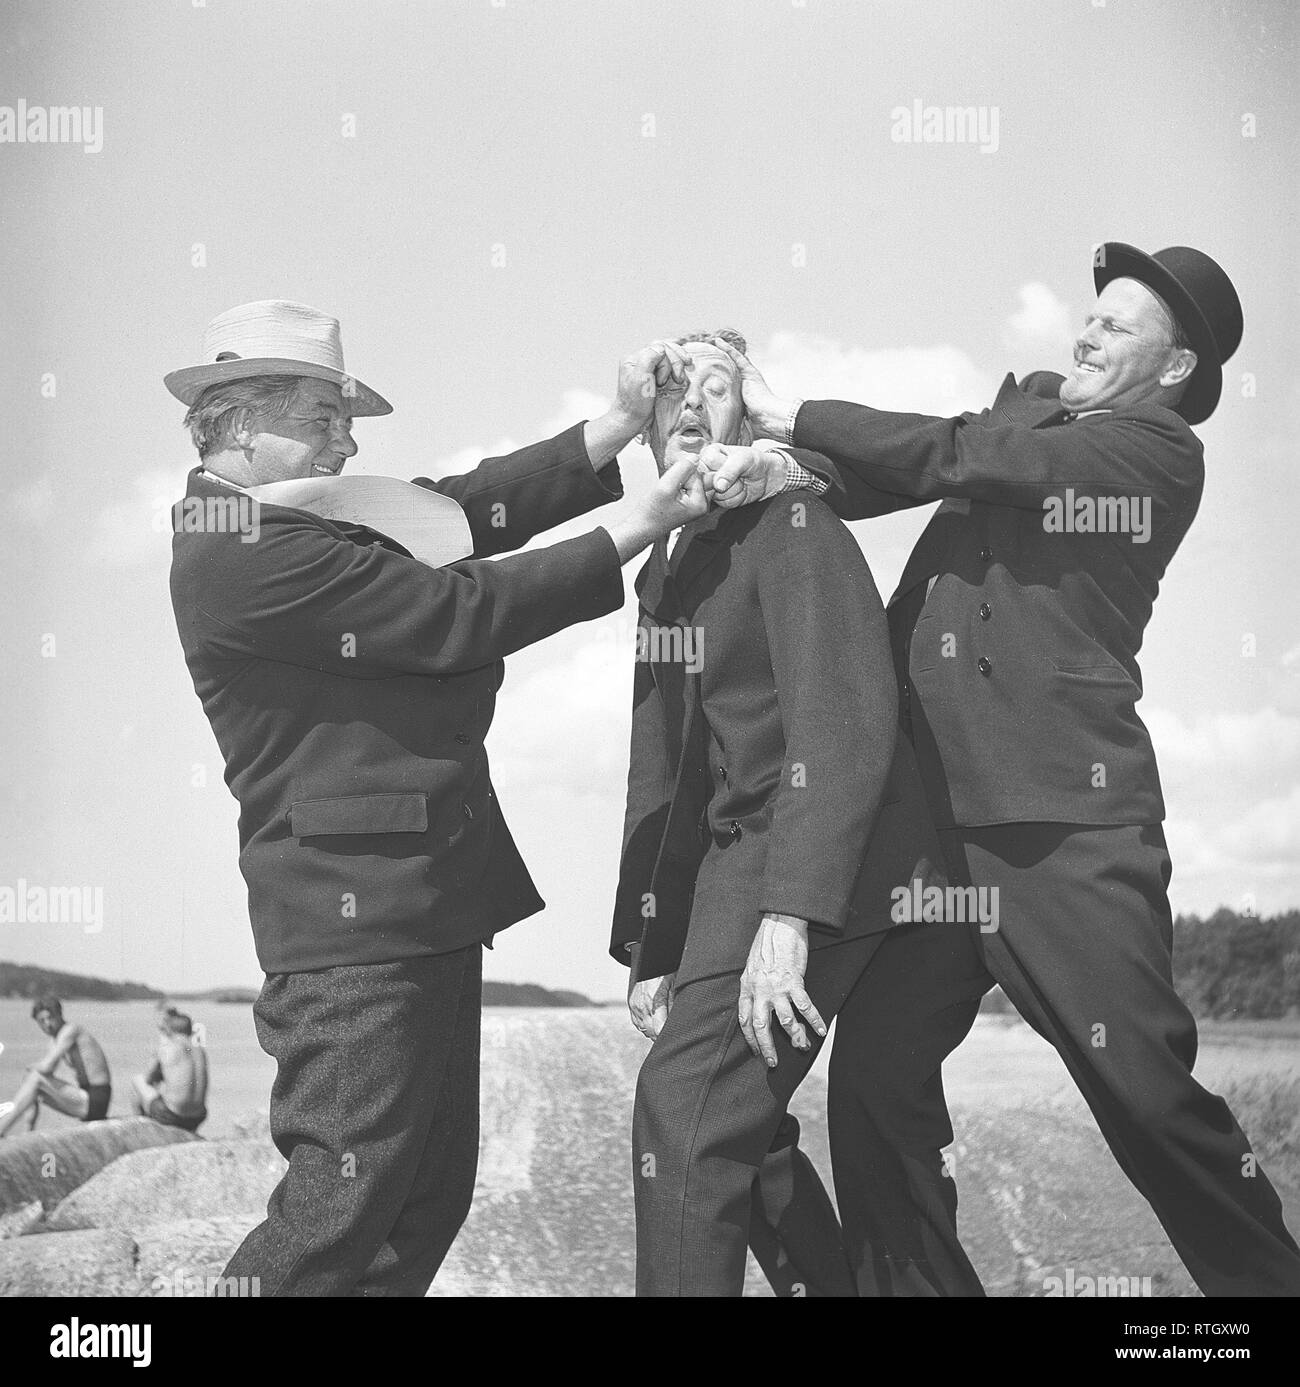 Men of the 1940s. An odd picture of three men involved in a physical argument, with a seemingly innocent man caught in the middle. Photo Kristoffersson Ref P49-4. Sweden 1945 Stock Photo